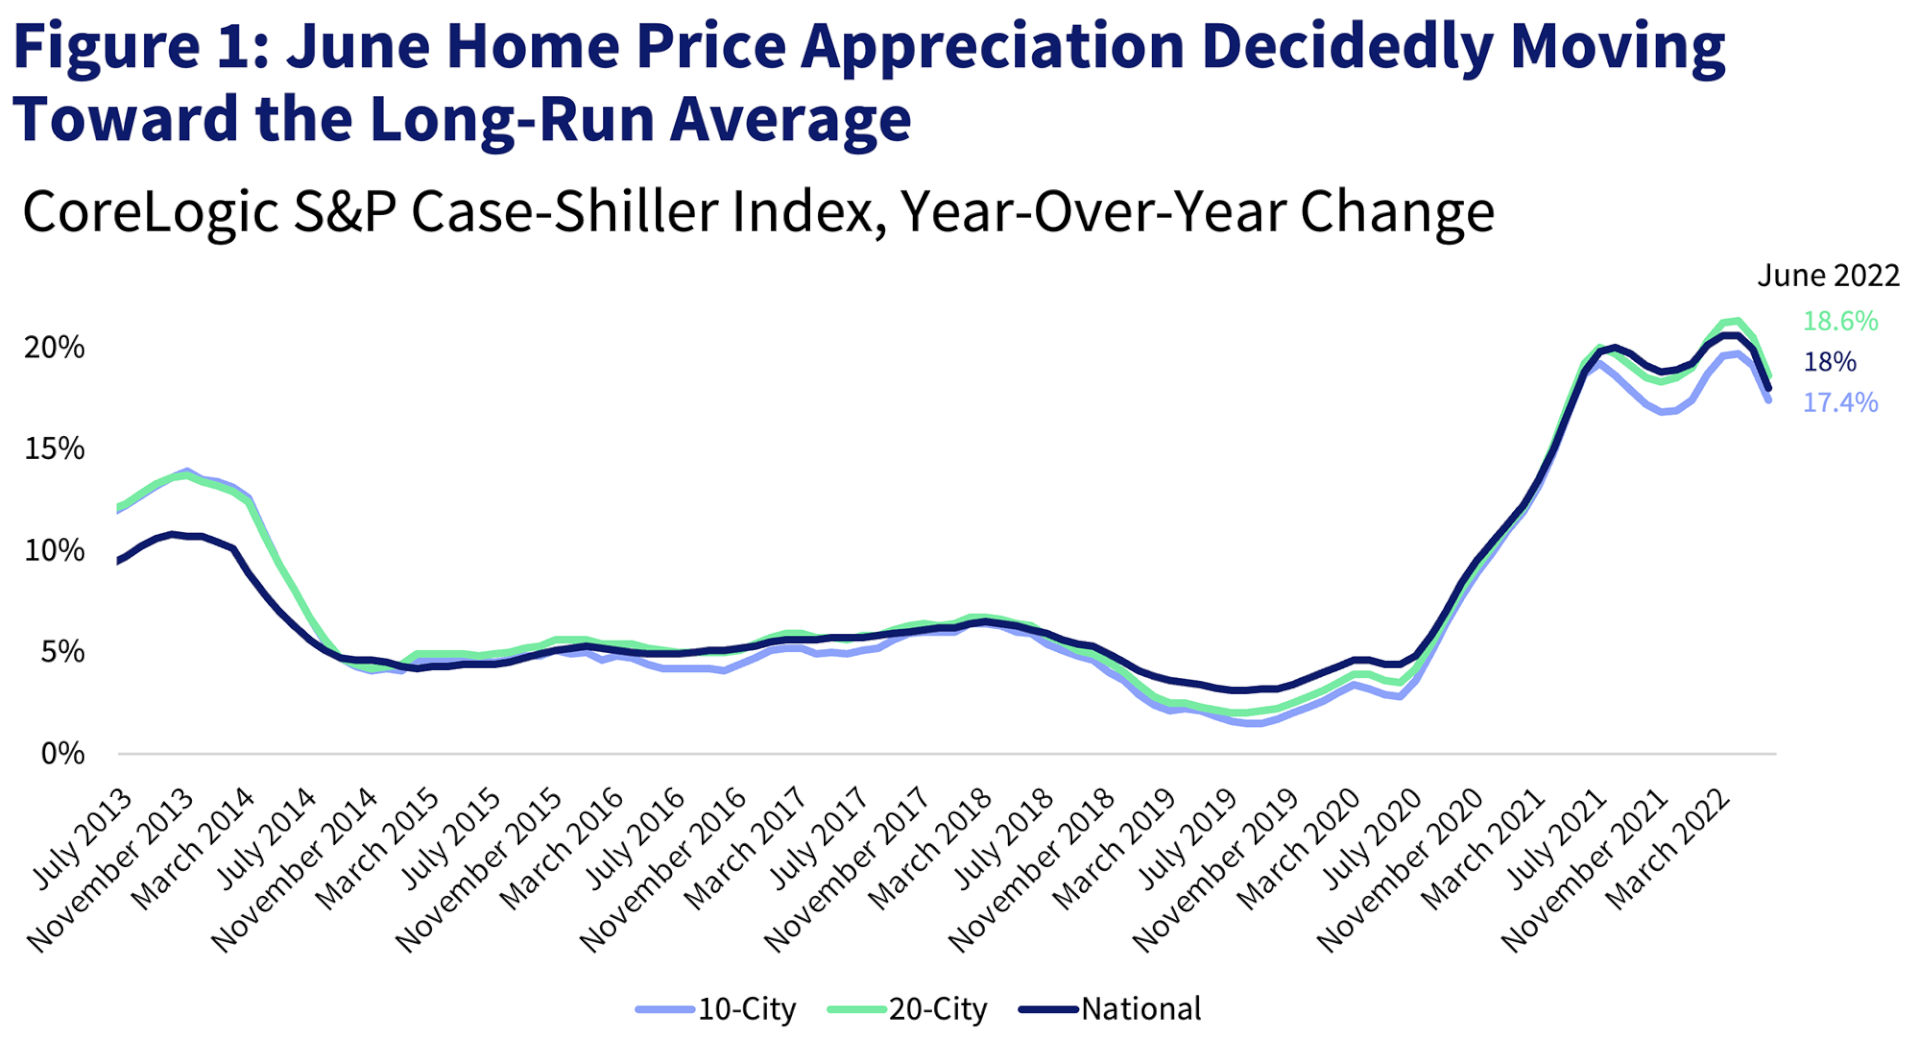 Figure 1: July Home Price Appreciation Decidedly Moving Toward the Long-Run Average